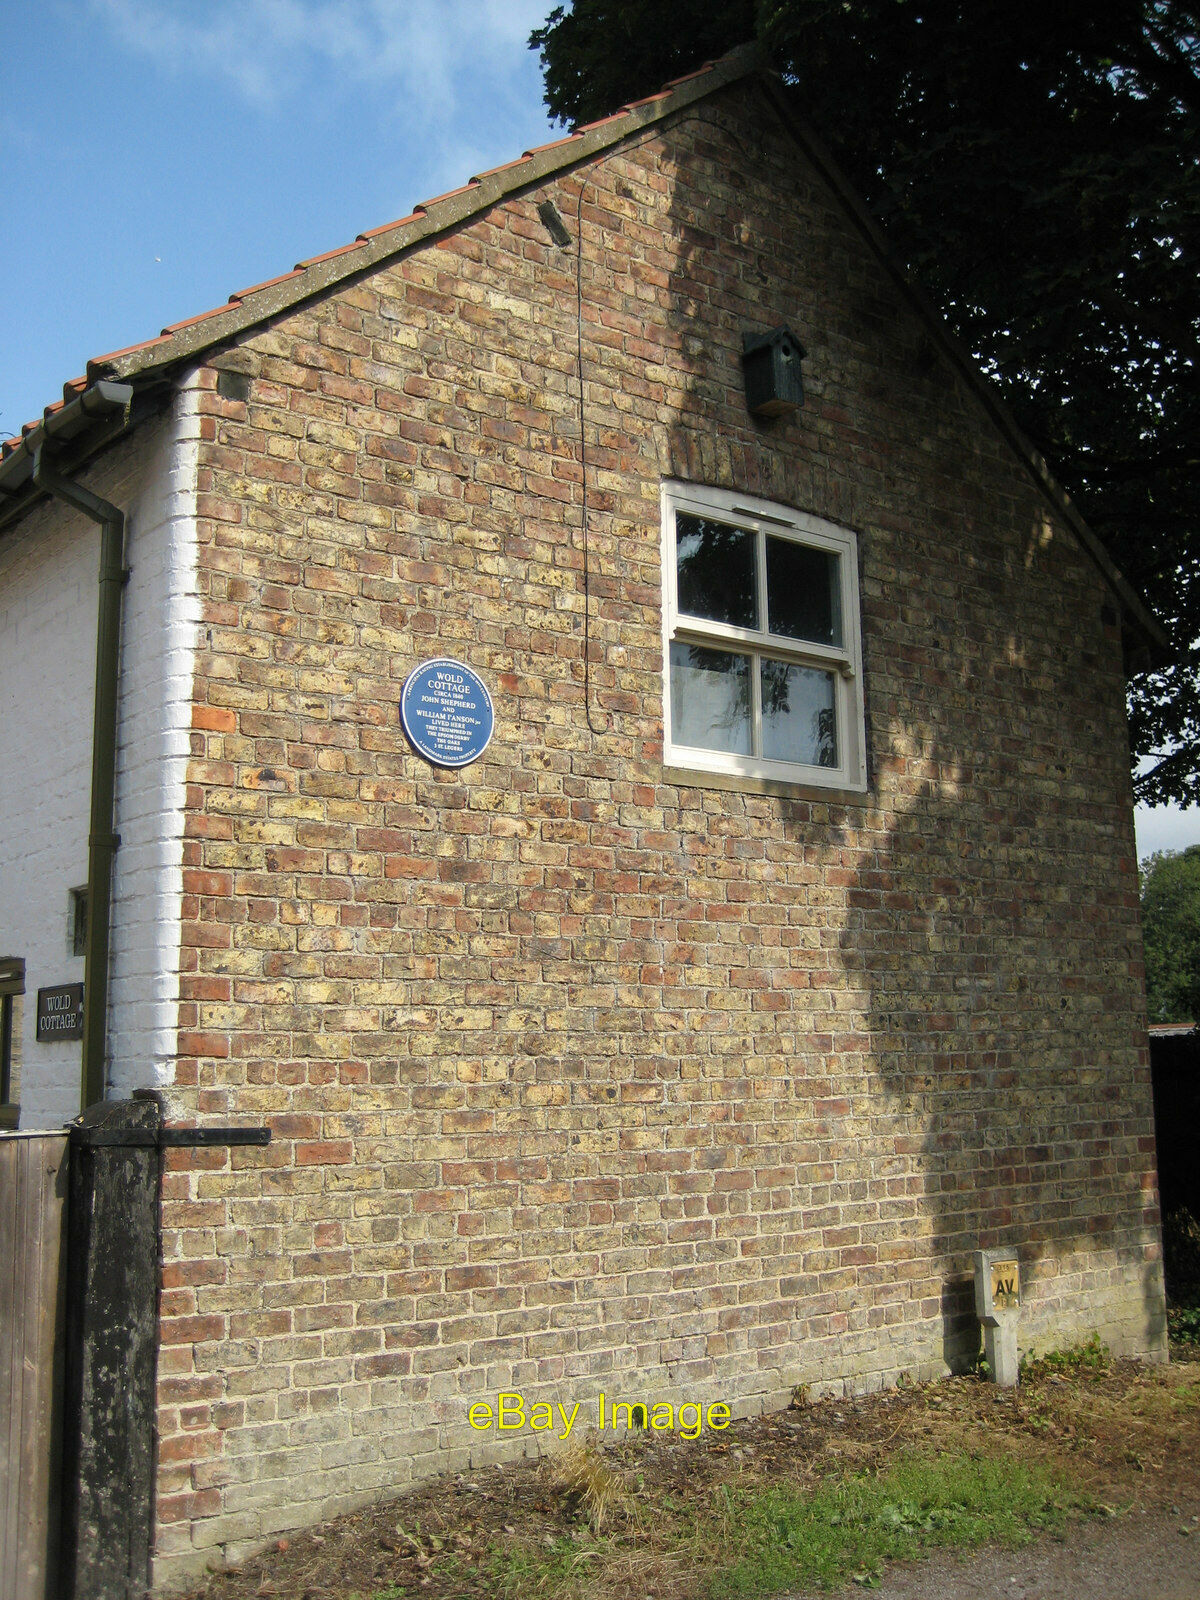 Photo 12x8 Cottage with blue plaque Wold Cottage circa 1840 home to two su c2013